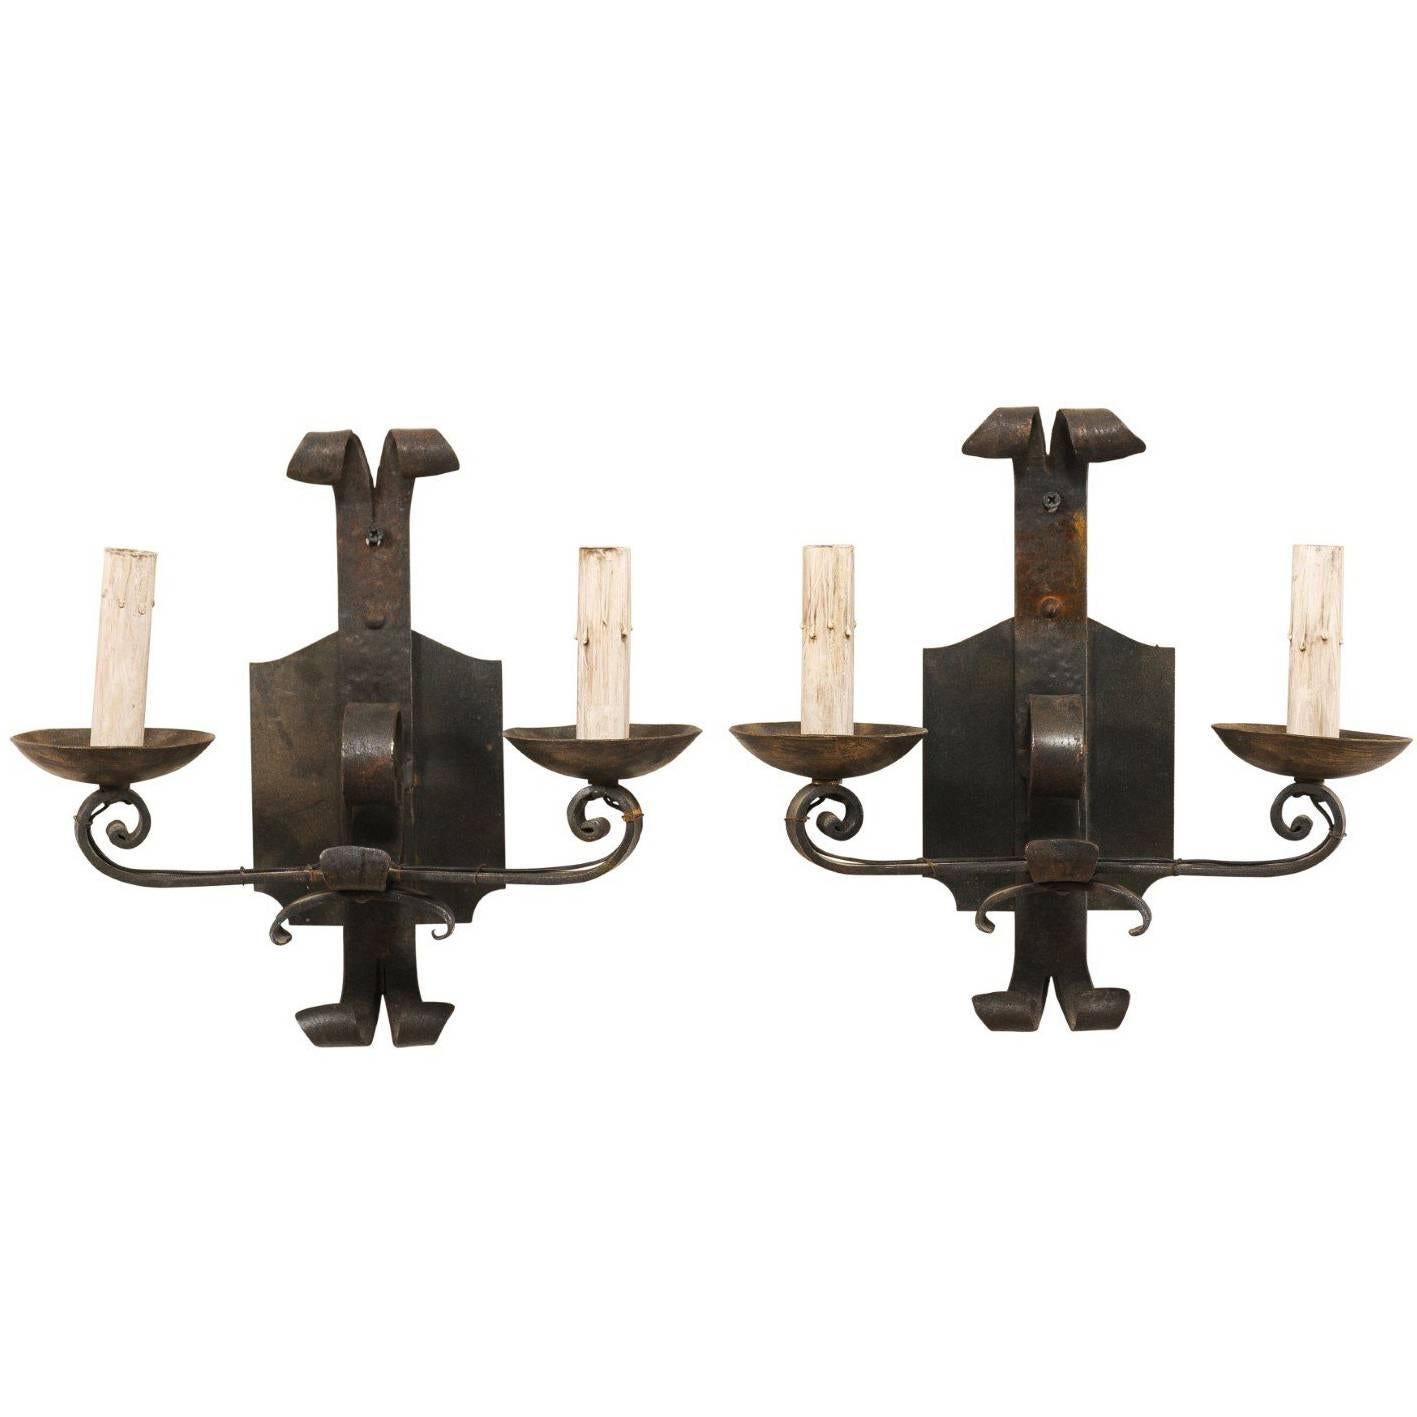 Pair of French Two-Light Hand-Forged Iron Sconces with Scrolled Arms